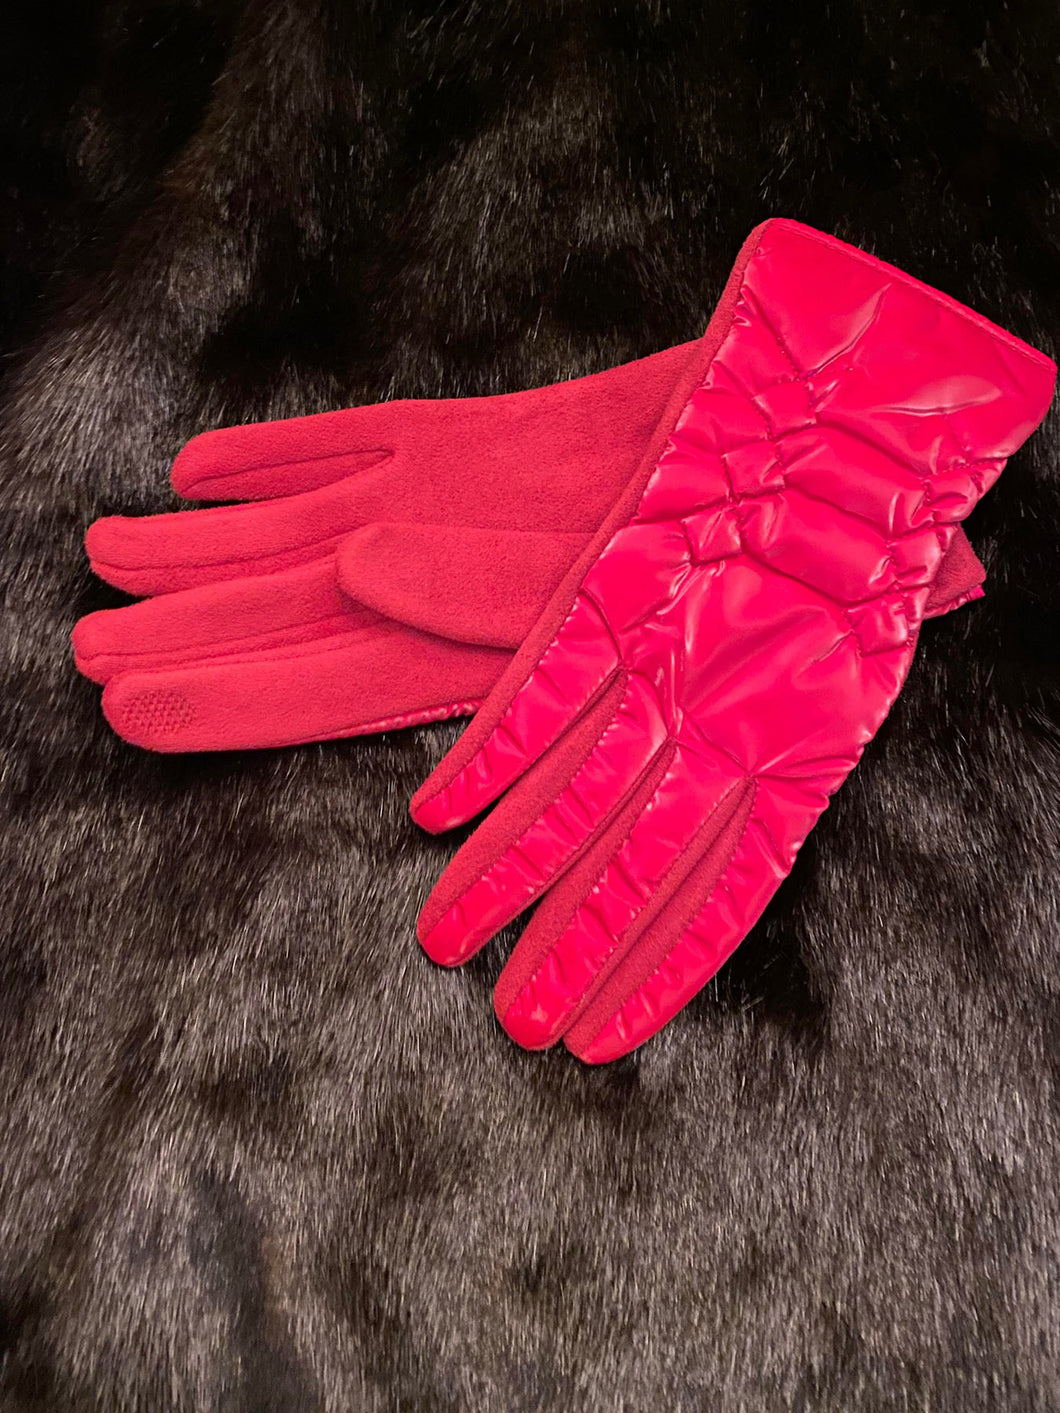 Red Patent Gloves